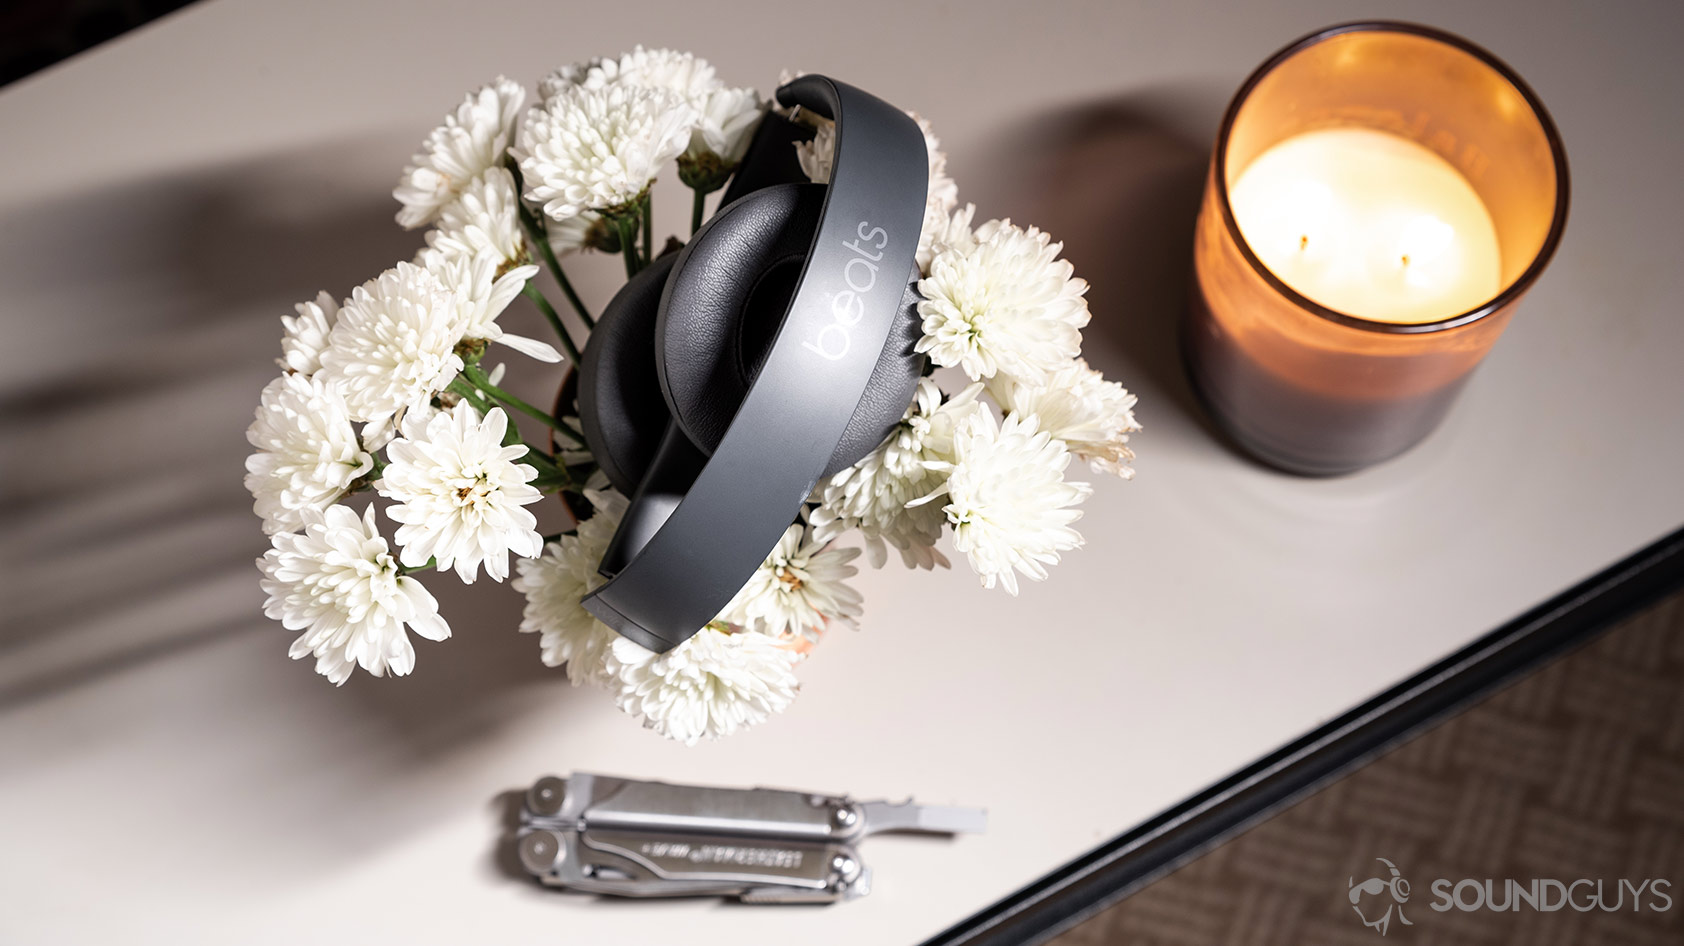 A picture of the Beats Solo3 Wireless headphones folded atop a bed of flowers with a candle and multitool.